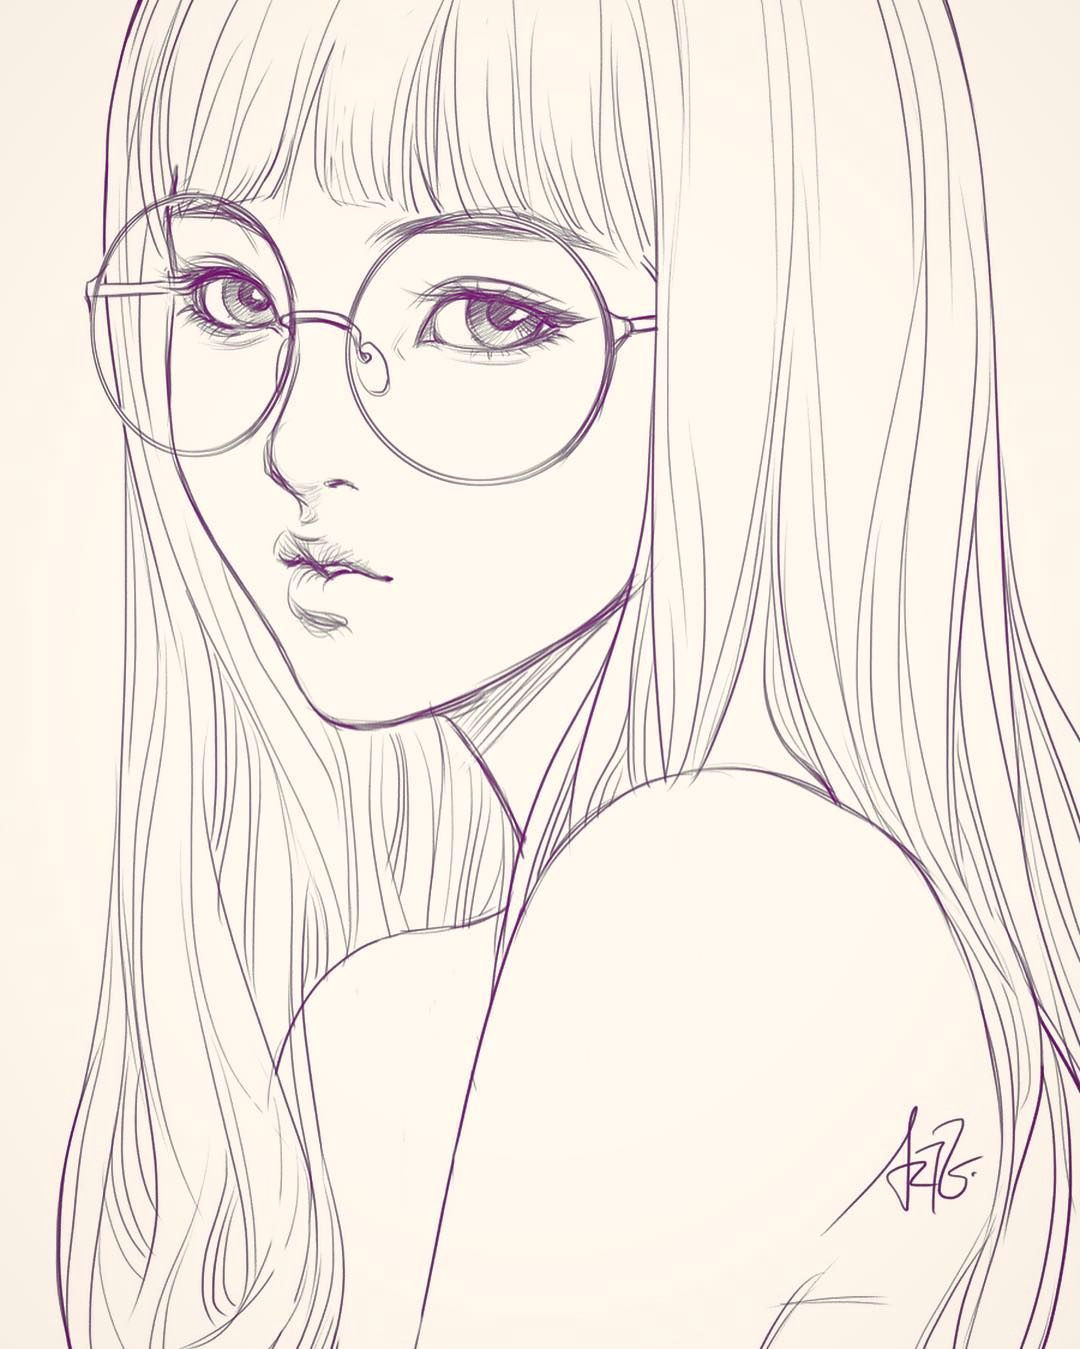 Easy Drawing Of A Girl Reading Last Sketch Of Girl with Glasses Having Bad Backache It Hurts